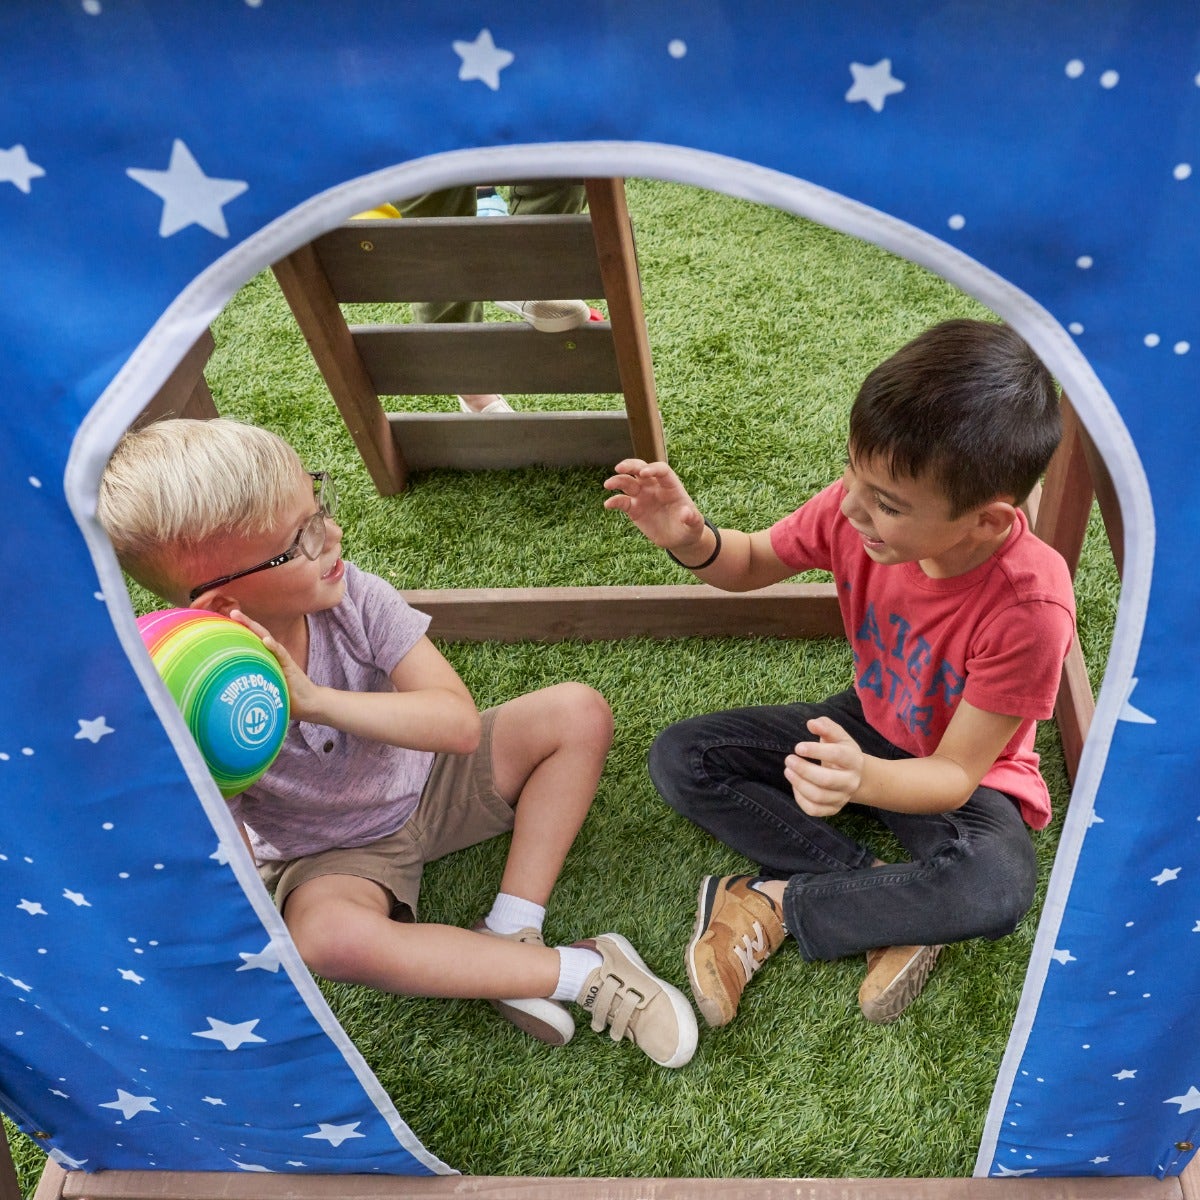 Secret Hideout: Enter the cutout door in the canvas underneath the deck and discover a cozy area for a clubhouse, ball pit, sandbox or more.